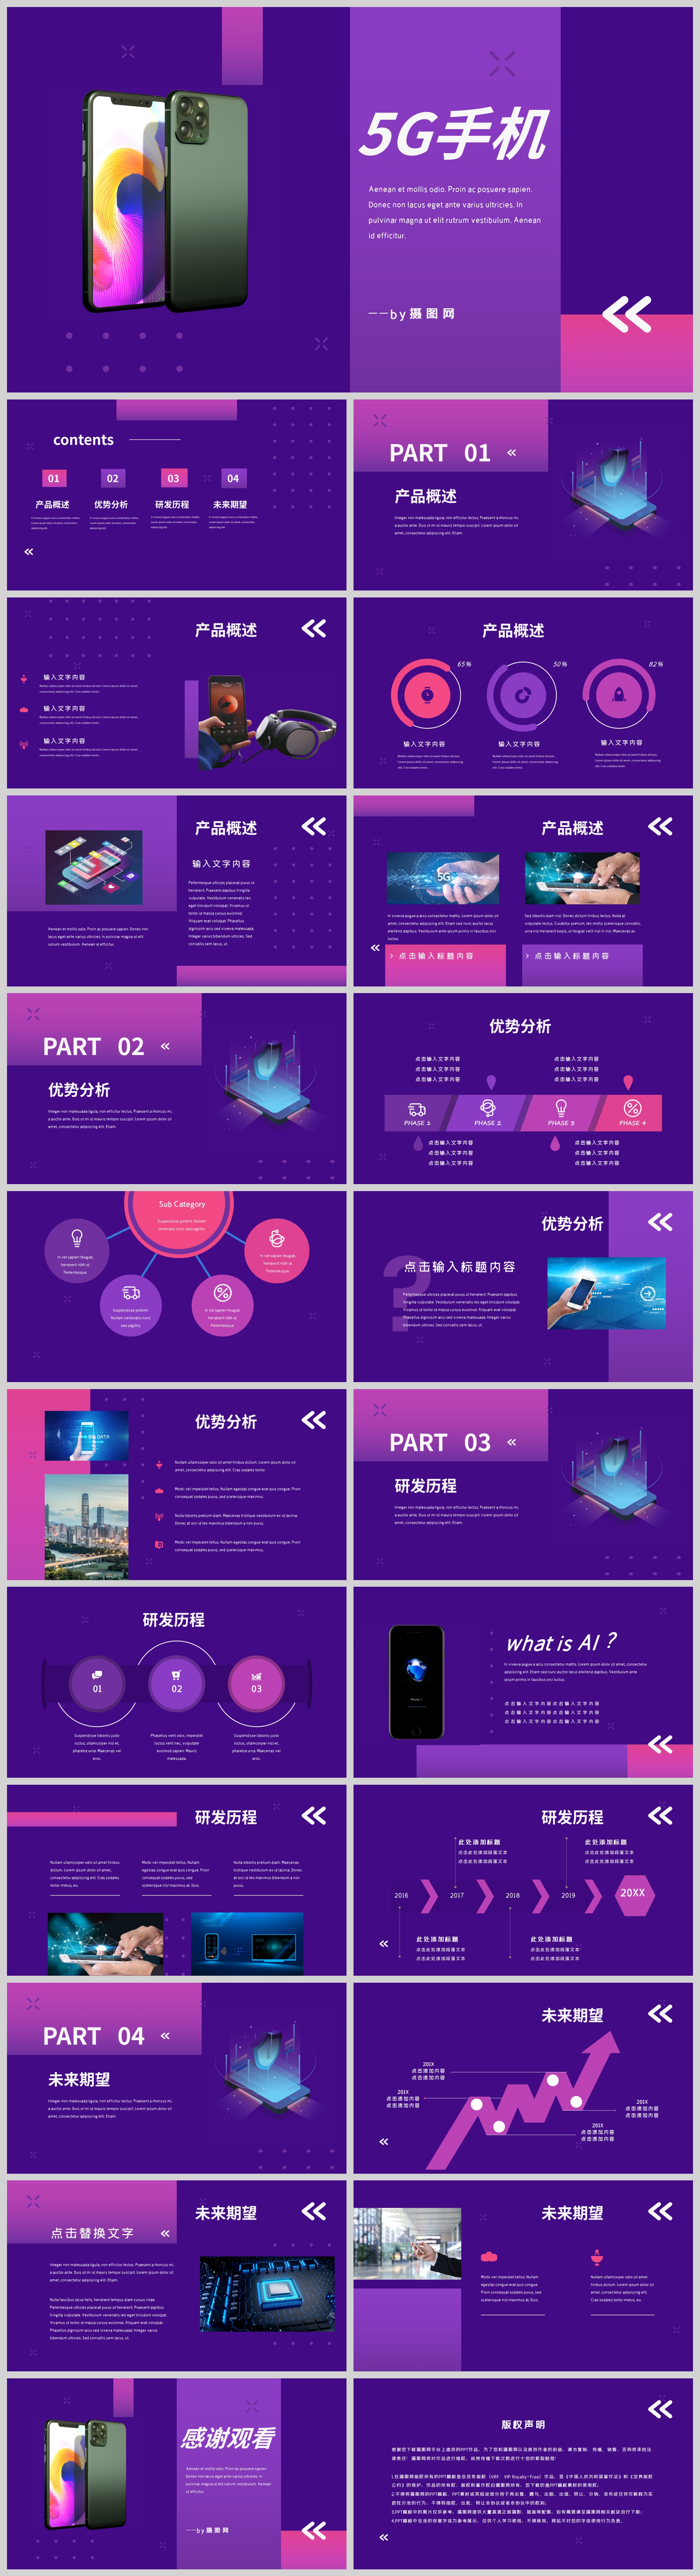 5g-technology-sense-mobile-phone-released-ppt-template-powerpoint